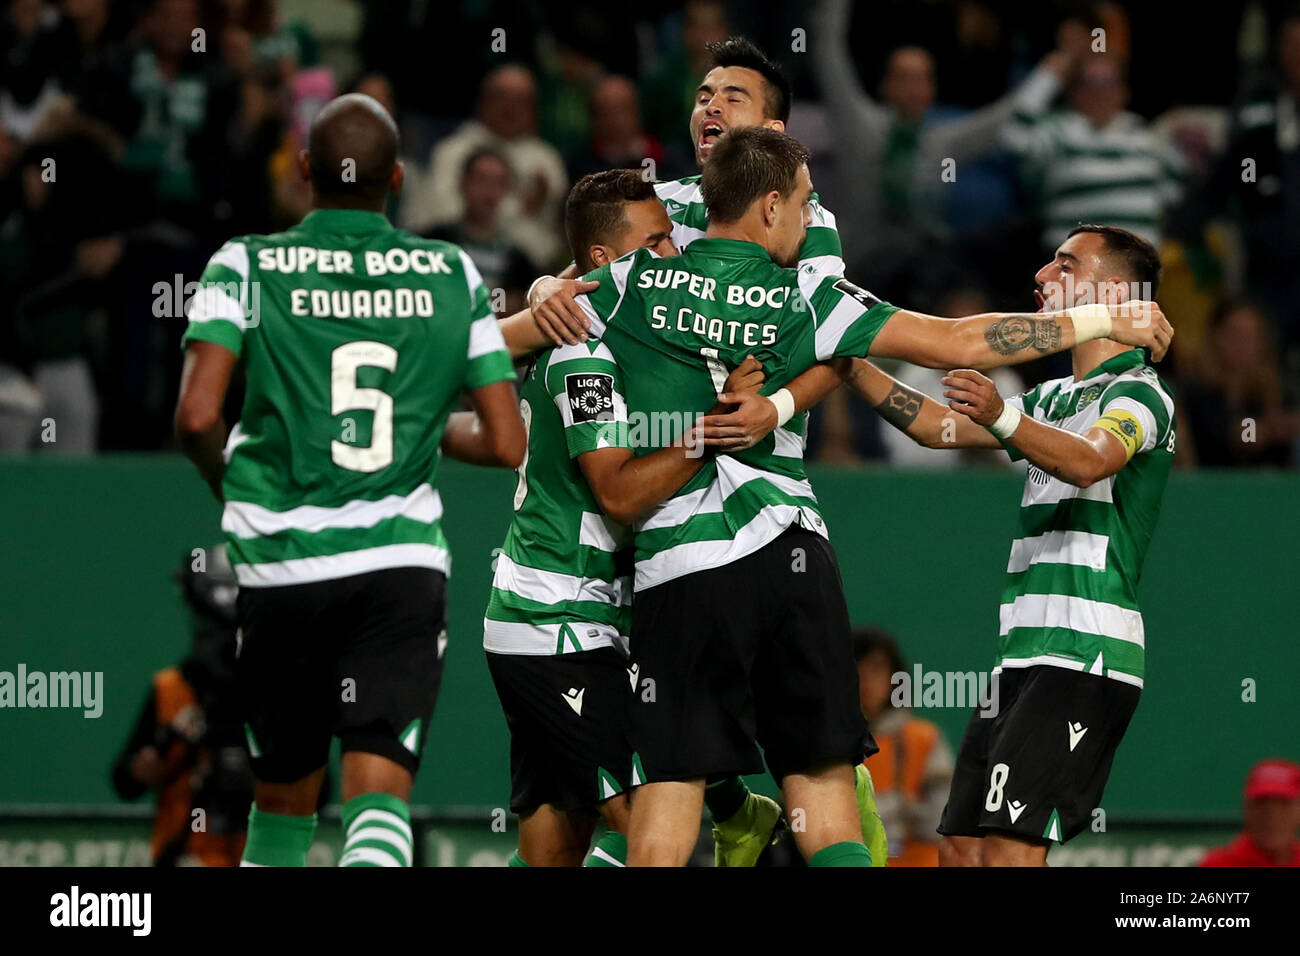 Lisbon, Portugal. 27th Oct, 2019. Sebastian Coates (2nd R) of Sporting CP celebrates with teammates after scoring during the Portuguese League football match in Lisbon, Portugal, Oct. 27, 2019. Credit: Pedro Fiuza/Xinhua/Alamy Live News Stock Photo